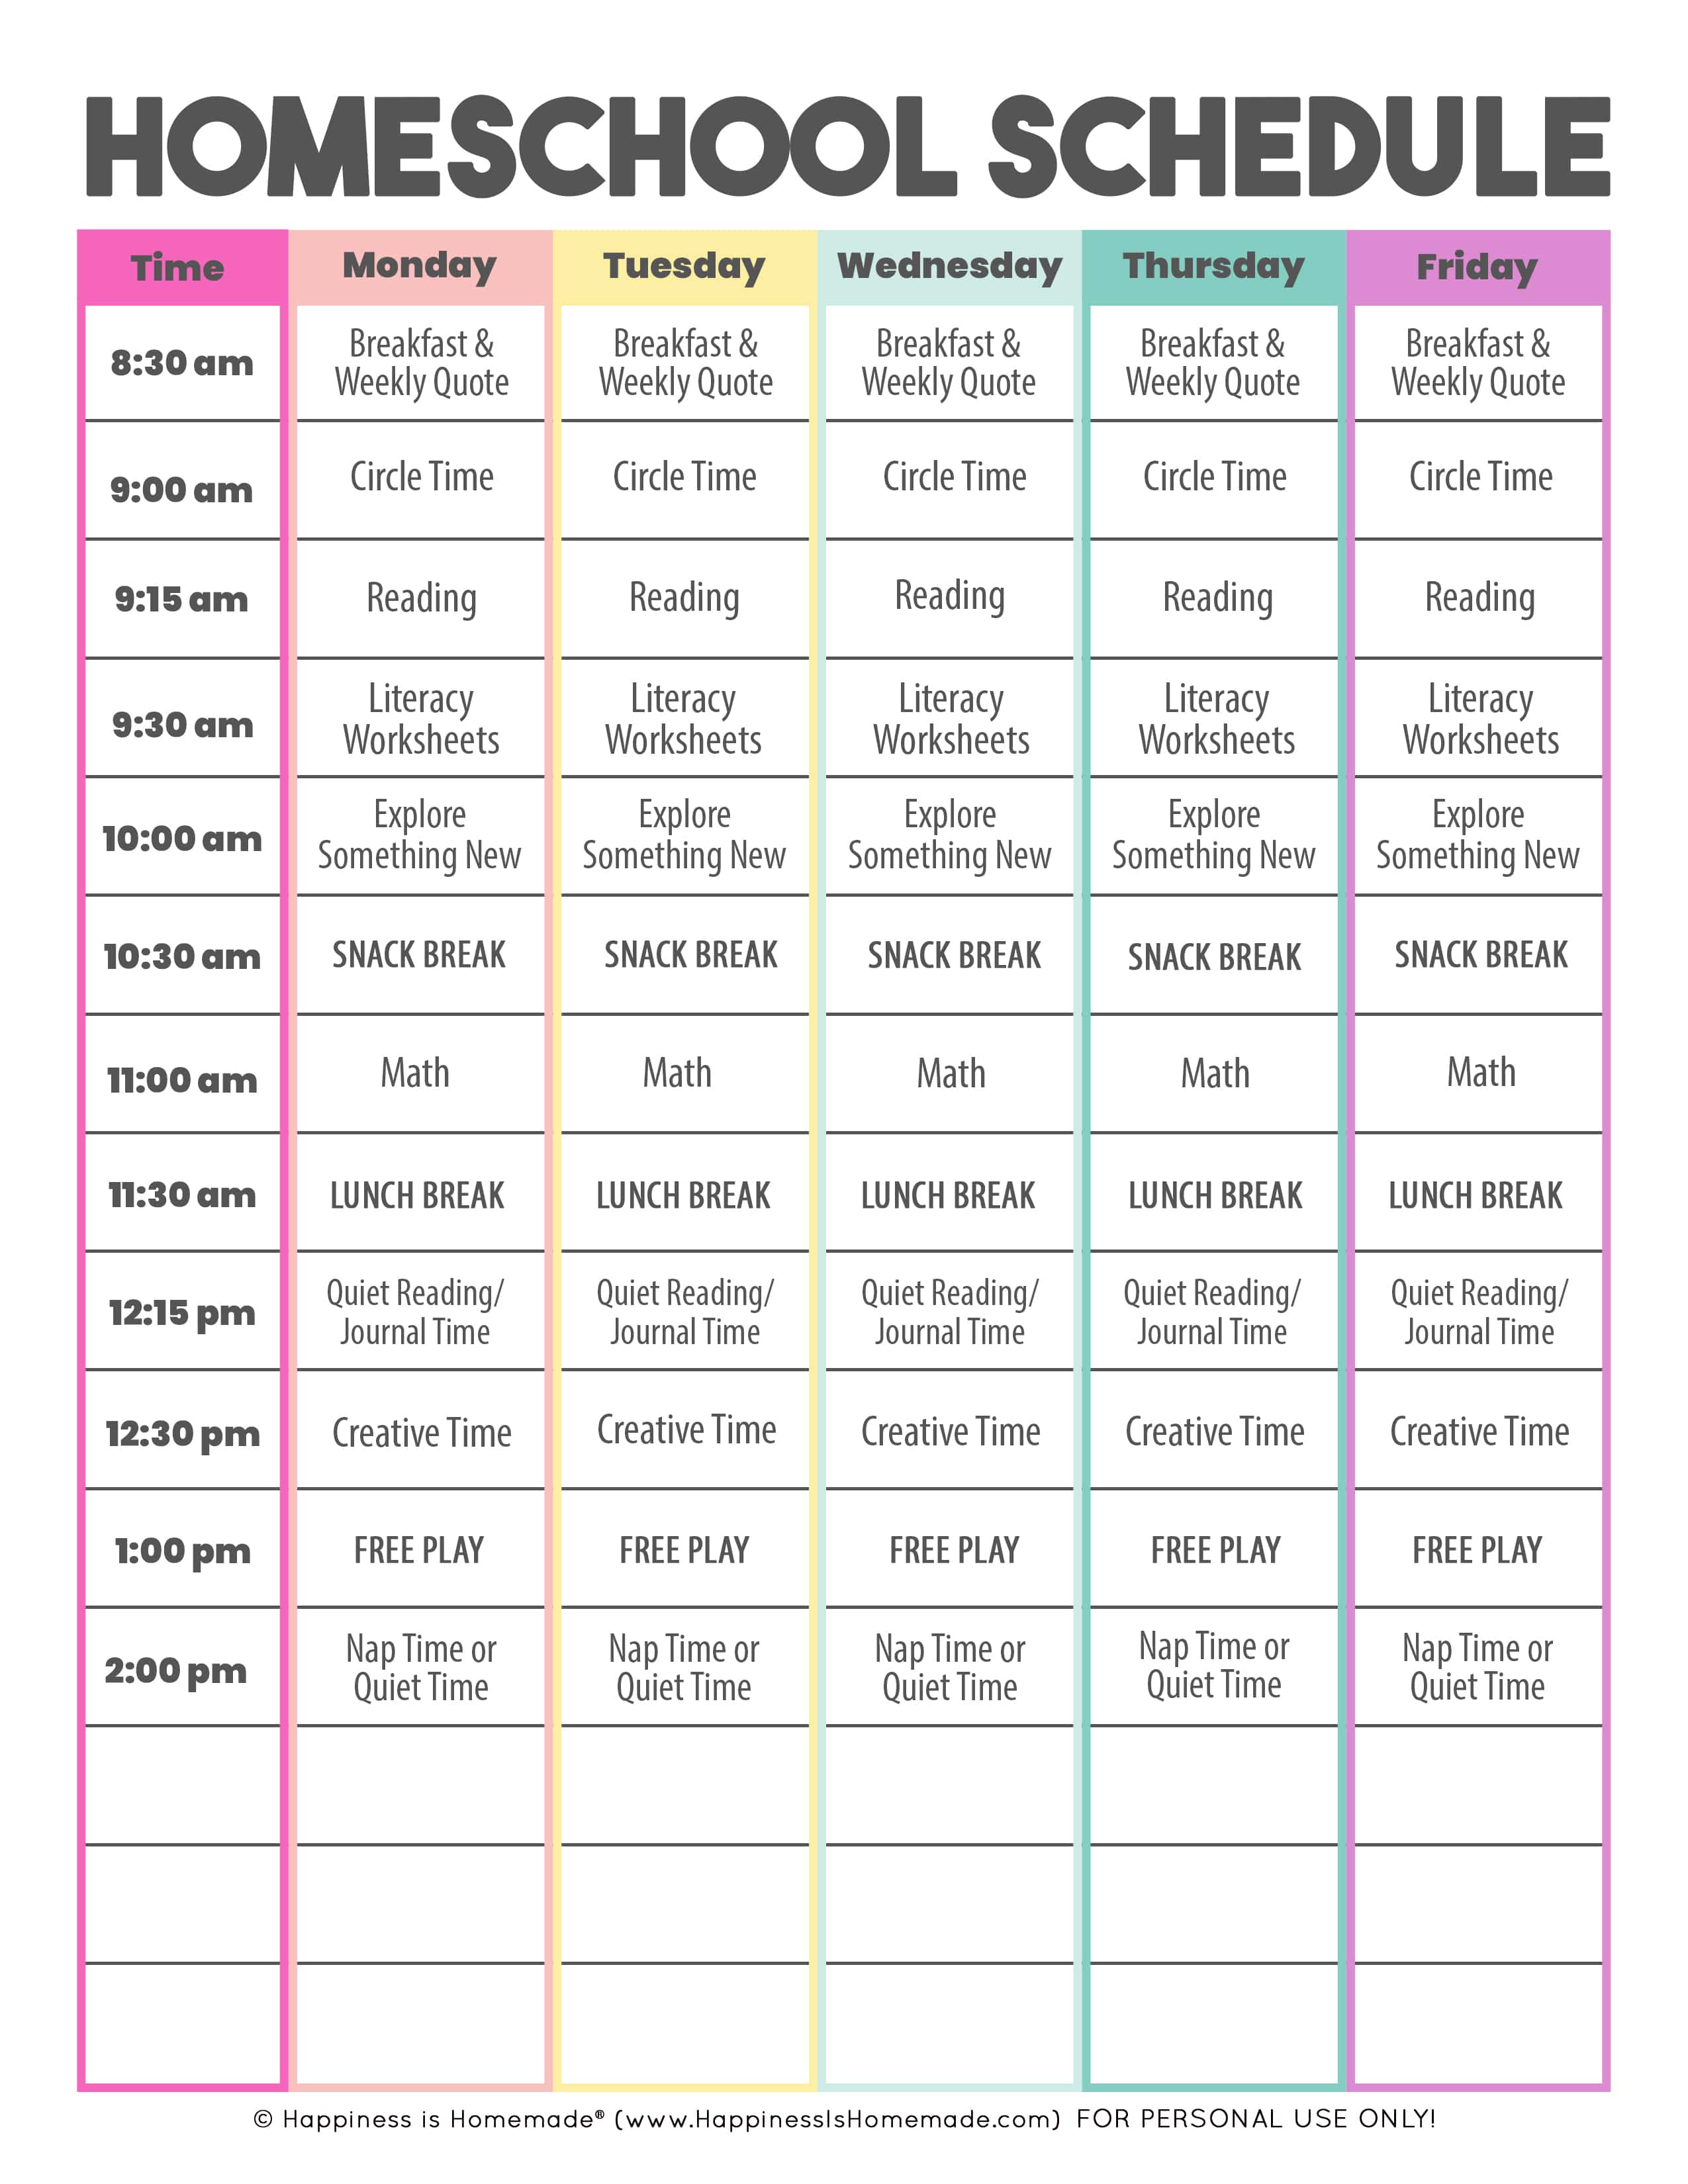 Daily Homeschool Schedule Samples Happiness is Homemade